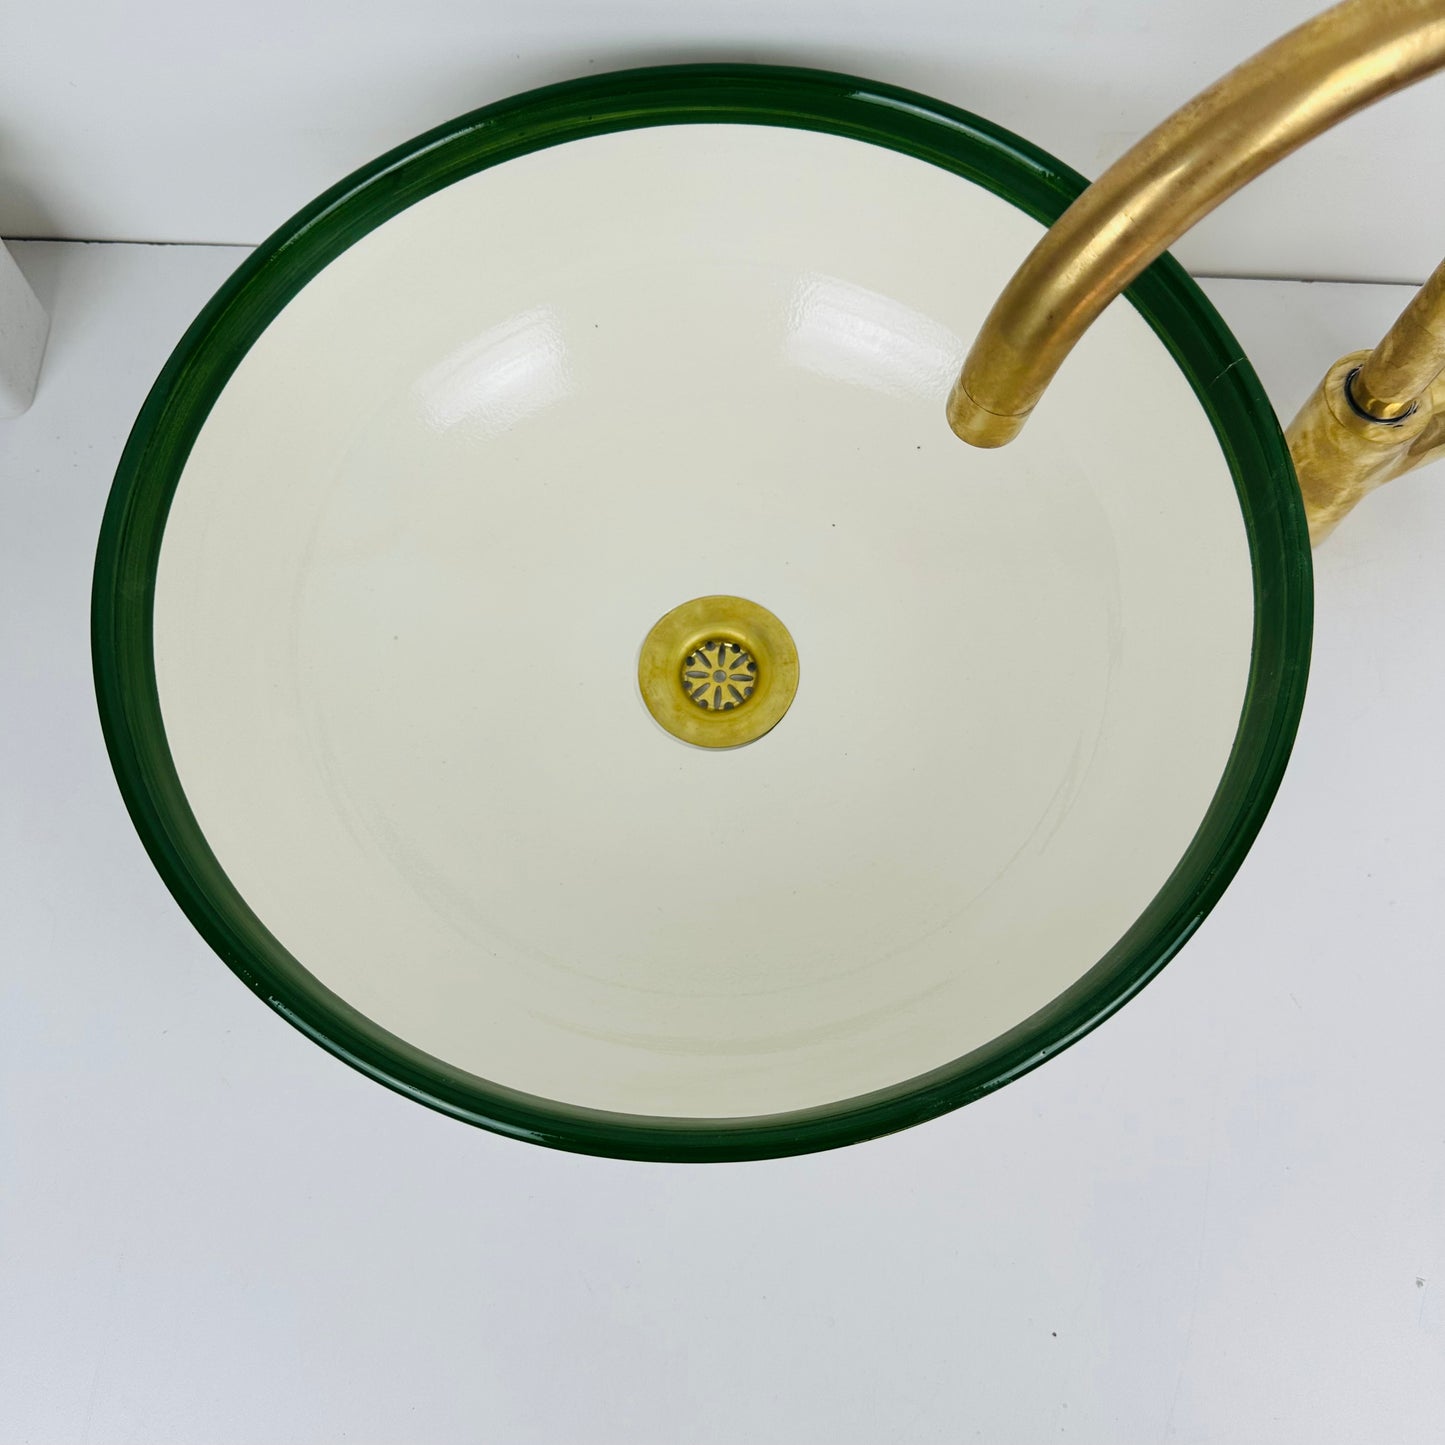 Round Elegance: Handcrafted Ceramic Sink with Green Top Finish